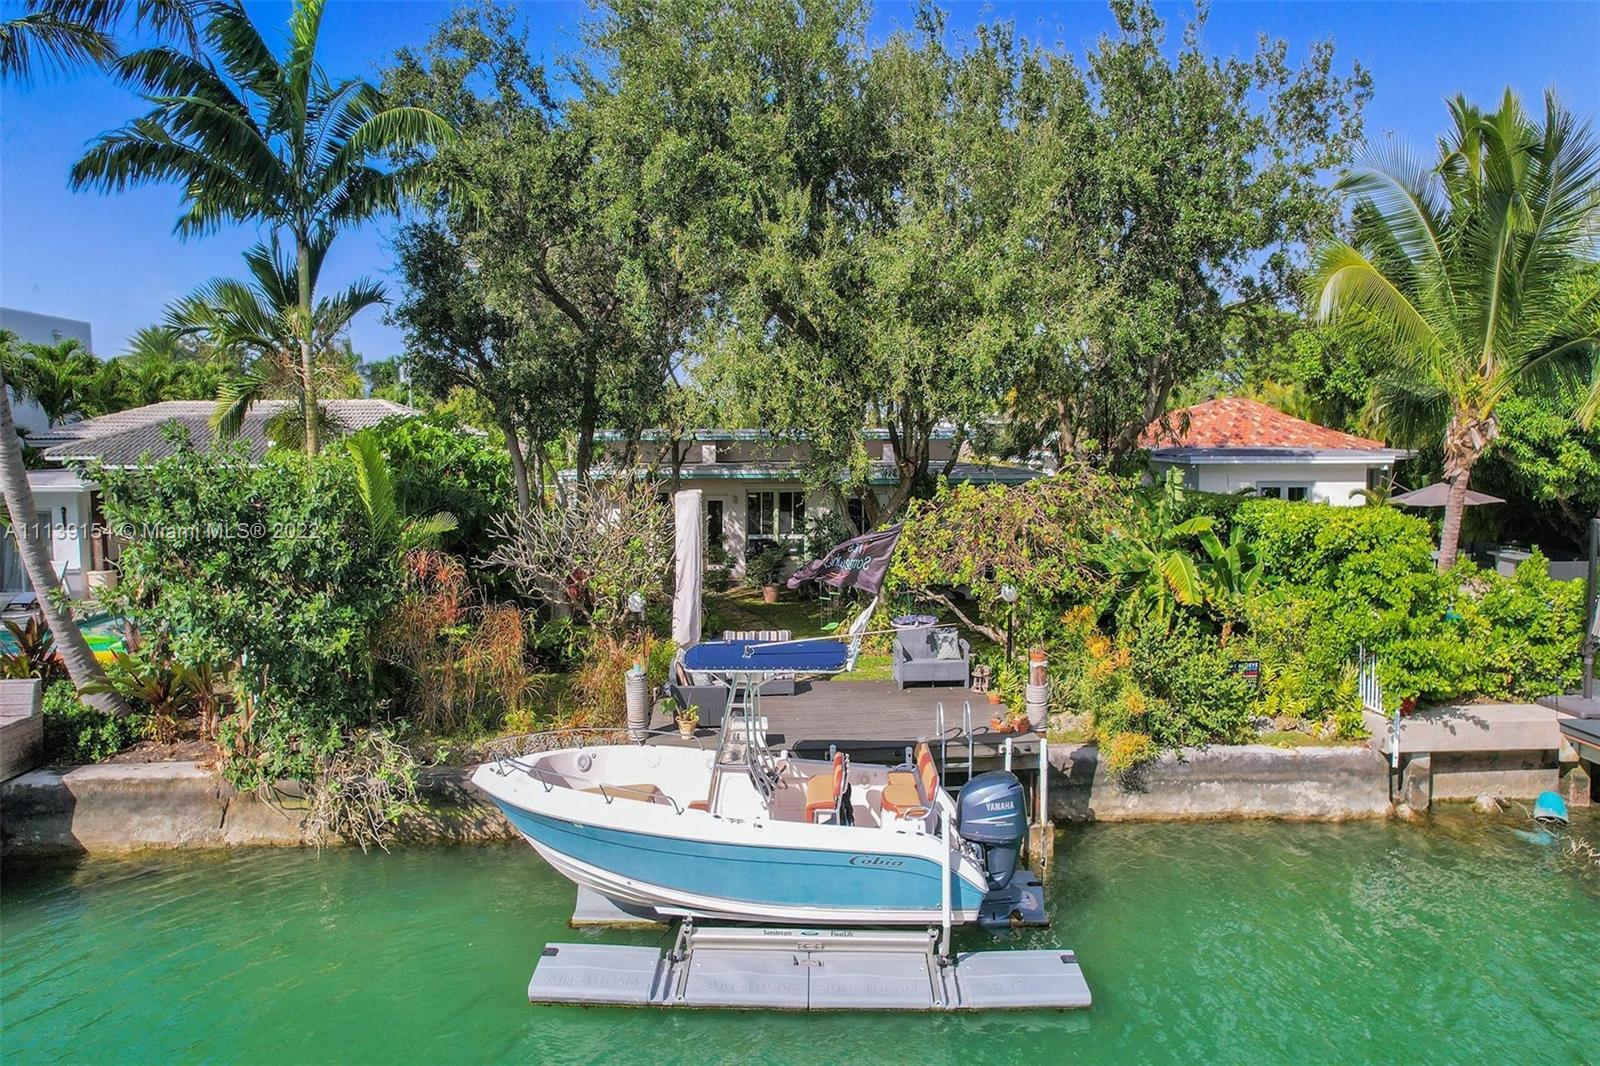 Step into an urban jungle in sought after Normandy Shores Isle. This bright 3/3 split plan open format home perfect for entertaining & enjoying the boat life. Entrance is private away from street w/ pond. Updated kitchen w/ stainless steel appliances & gas stove. Rooms are spacious, bright w/ full bathrooms. Back yard has 20-year-old oaks, rare lush landscaping & orchids. Trees have up lighting to enjoy on dock (space for a pool). Sunstream solar powered boat lift included fits up 28' boat. New roof installed 2020, 2 AC, gas water heater, Hurricane impact doors, large open driveway w/ space to add a circular driveway. Amazing gated community with golf course, tennis courts & work out park. Biking & walking distance to beach, parks, restaurants & more. A must see!